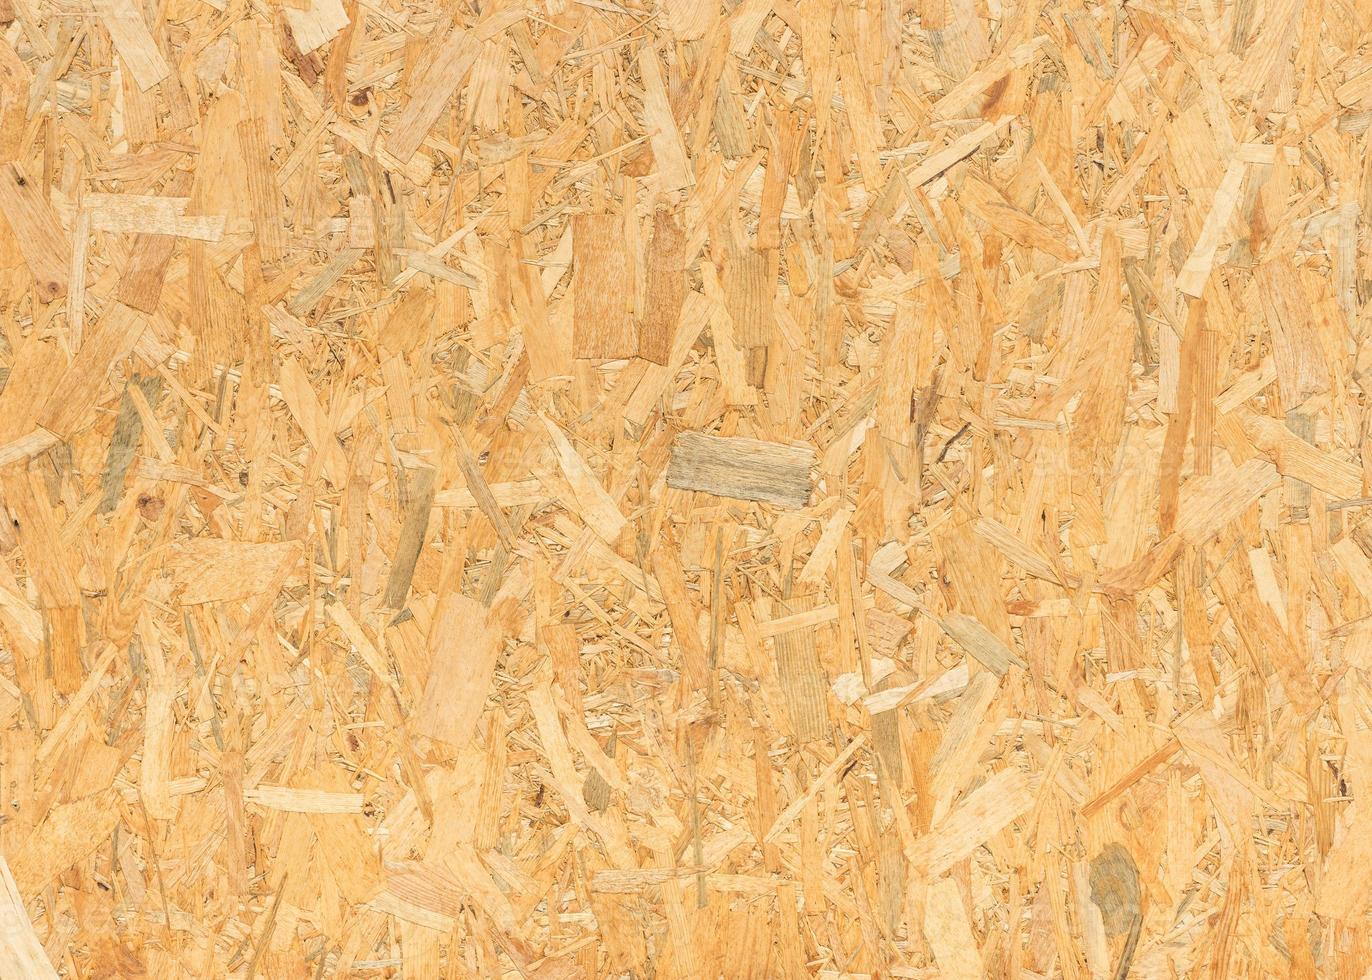 pressed wooden panel background, seamless texture of oriented strand board - OSB wood photo